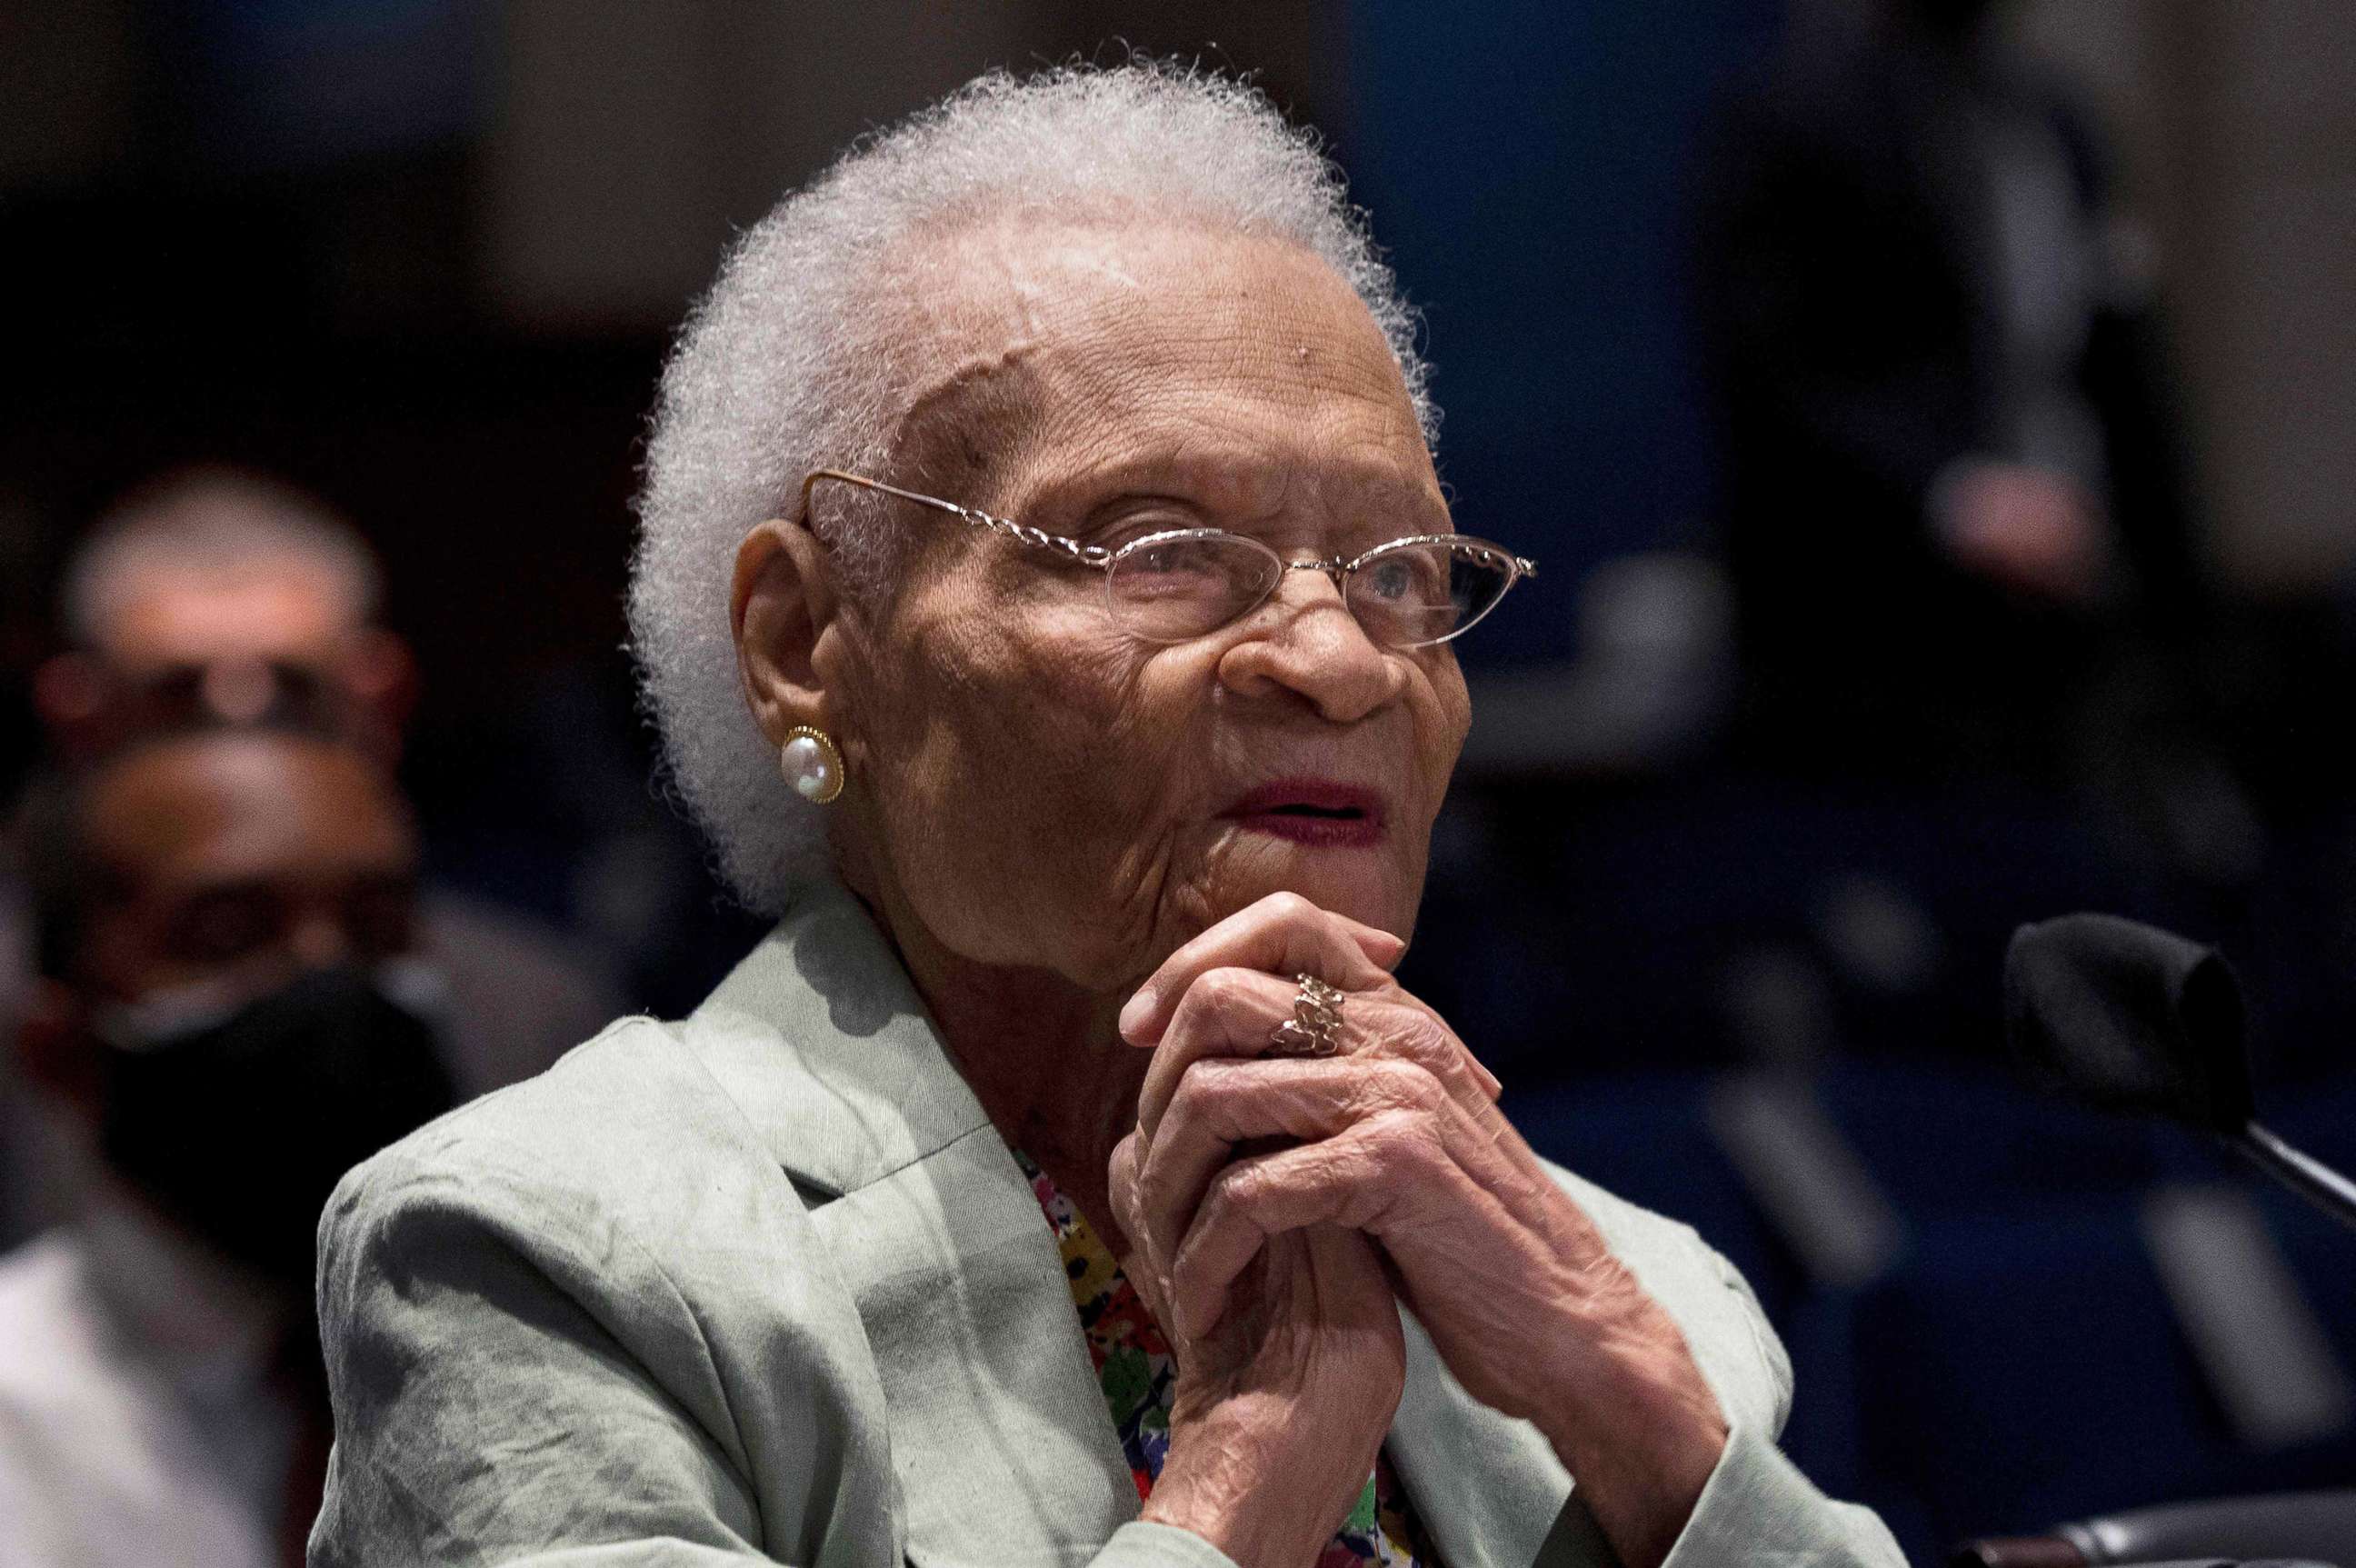 PHOTO: Viola Fletcher, the oldest living survivor of the Tulsa Race Massacre, testifies before during a hearing on "Continuing Injustice: The Centennial of the Tulsa-Greenwood Race Massacre" in Washington, D.C., May 19, 2021.